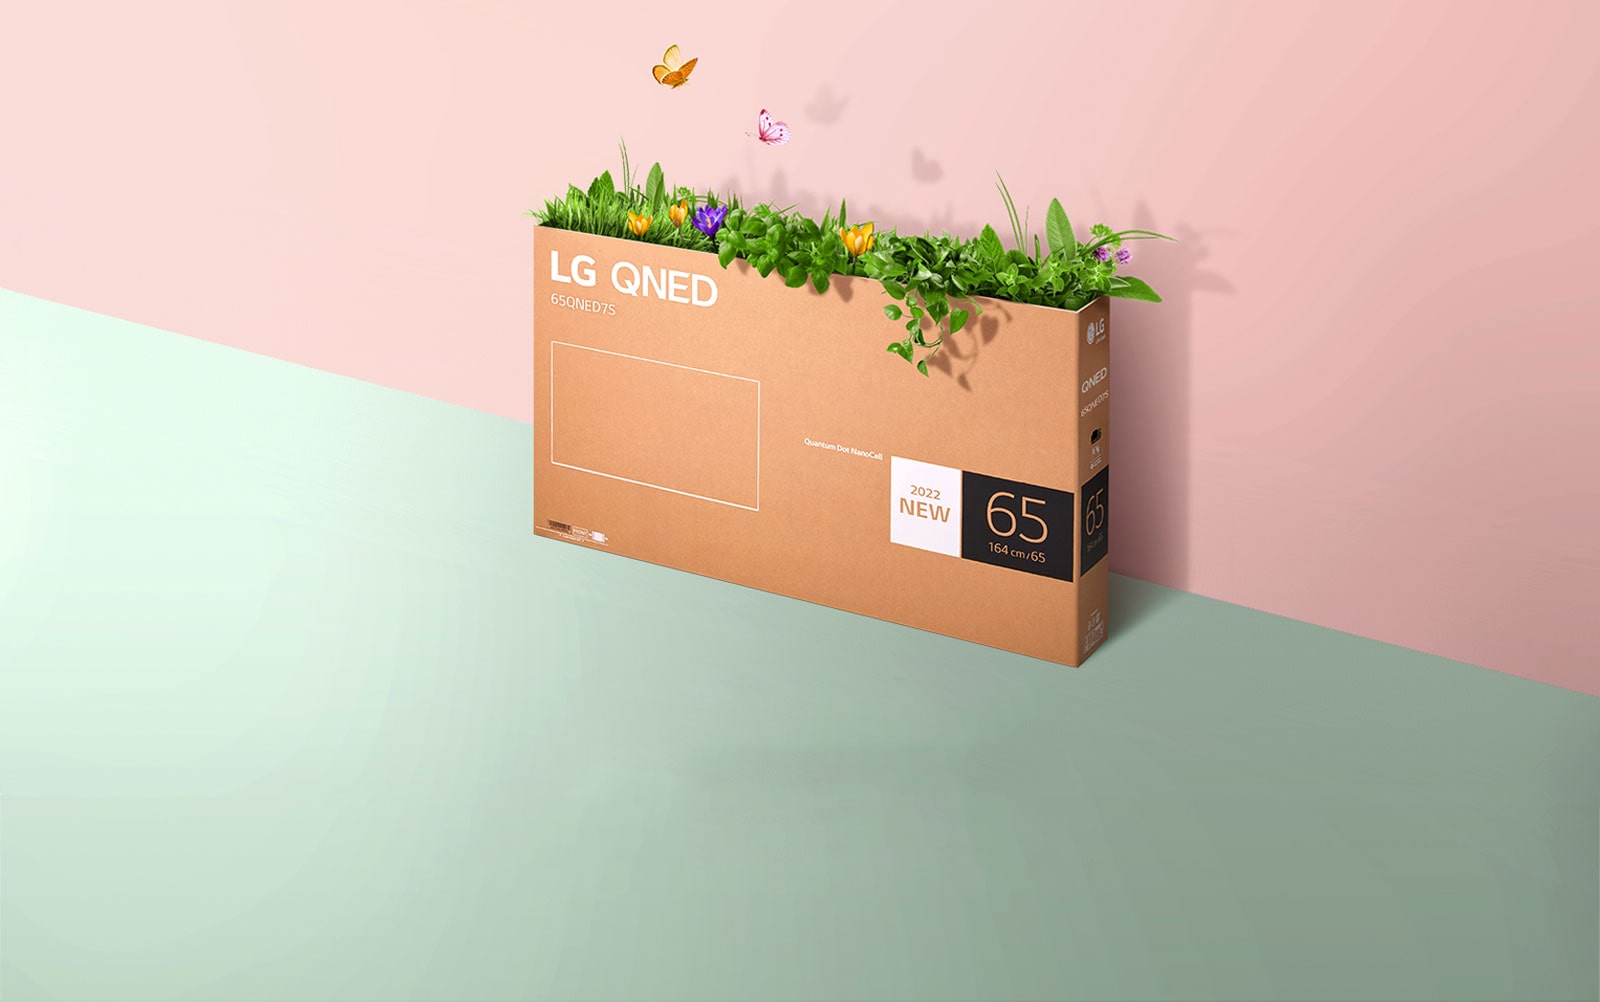 A QNED packaging box is placed on pink, green background and there is grass growing and butterflies coming out from its inside. 